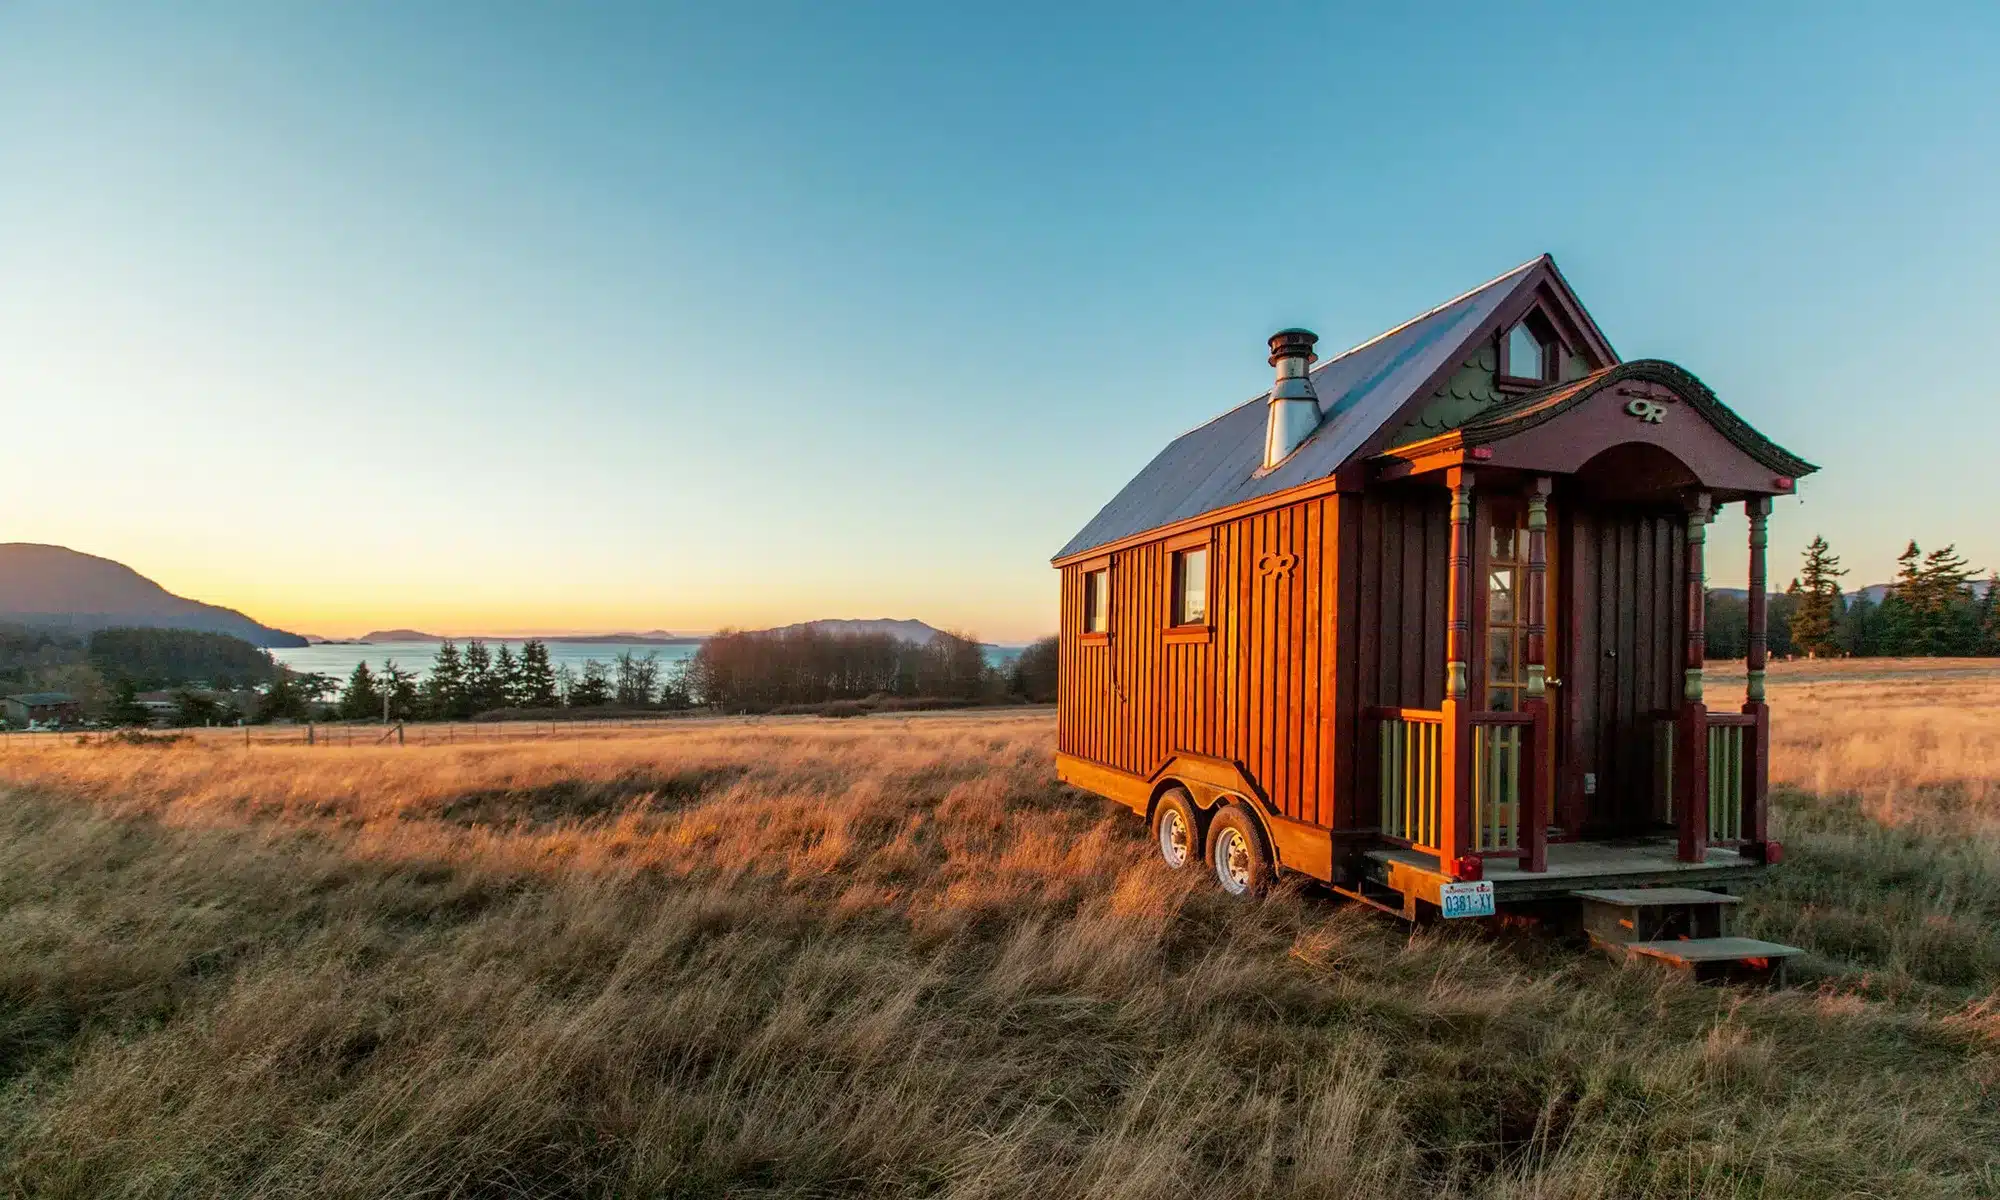 The Tiny Home Influence?